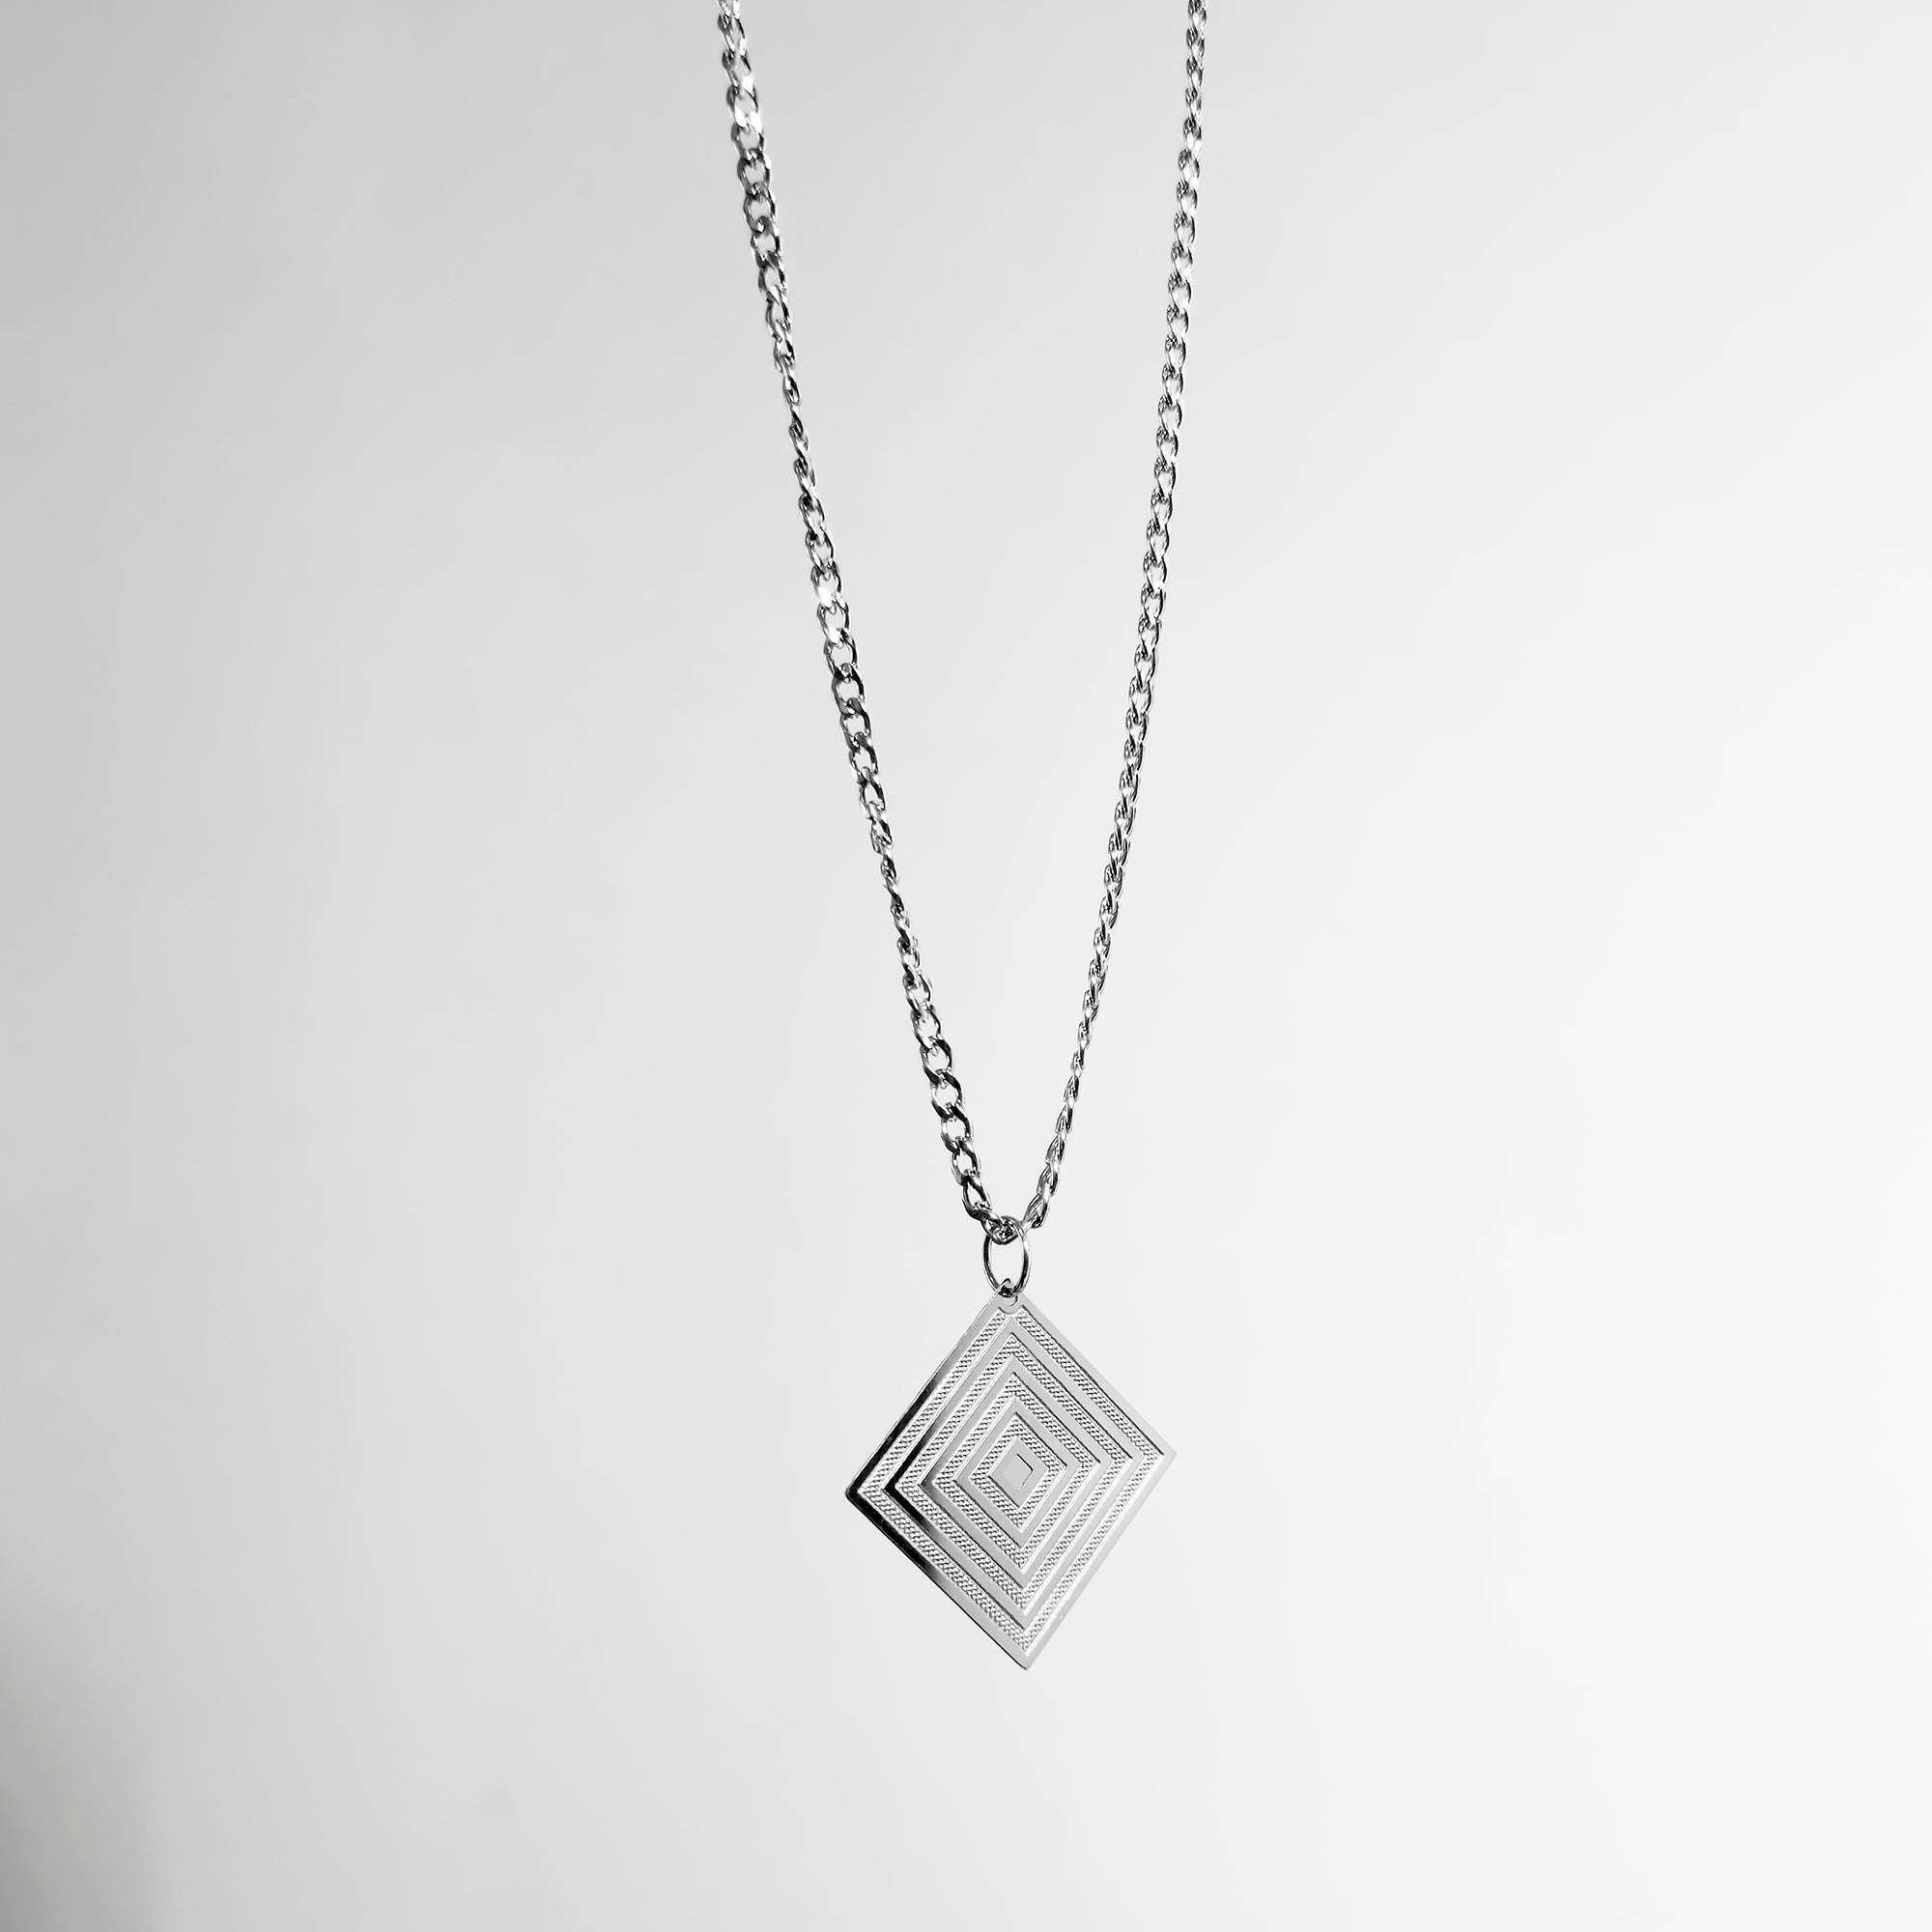 RADIAL SQUARE STEEL NECKLACE